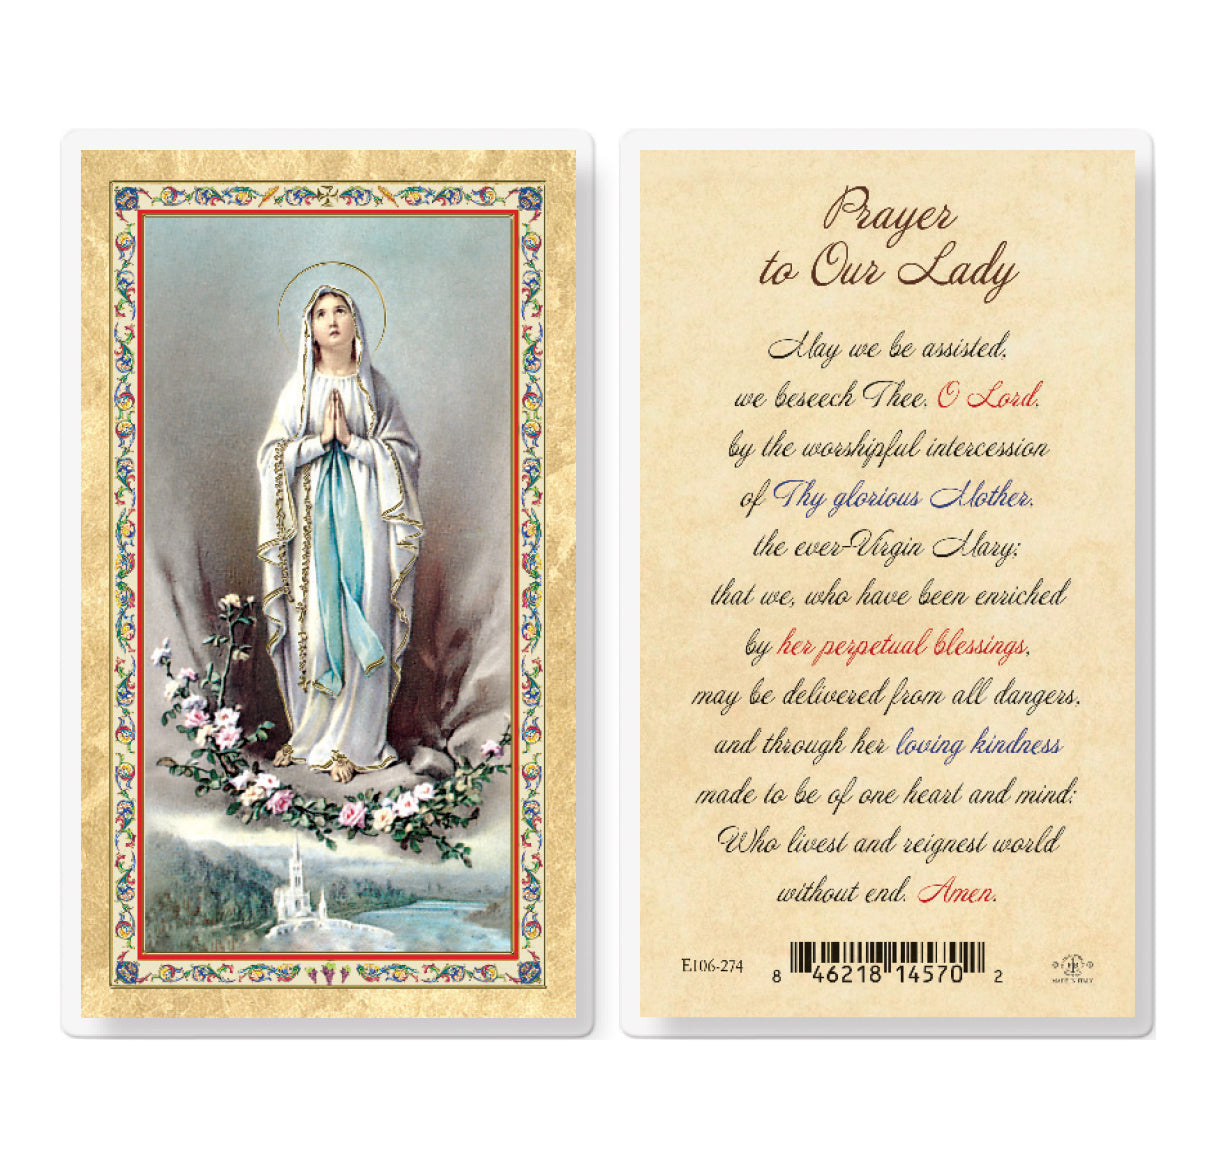 Prayer to Our Lady of Lourdes Gold-Stamped Laminated Catholic Prayer Holy Card with Prayer on Back, Pack of 25